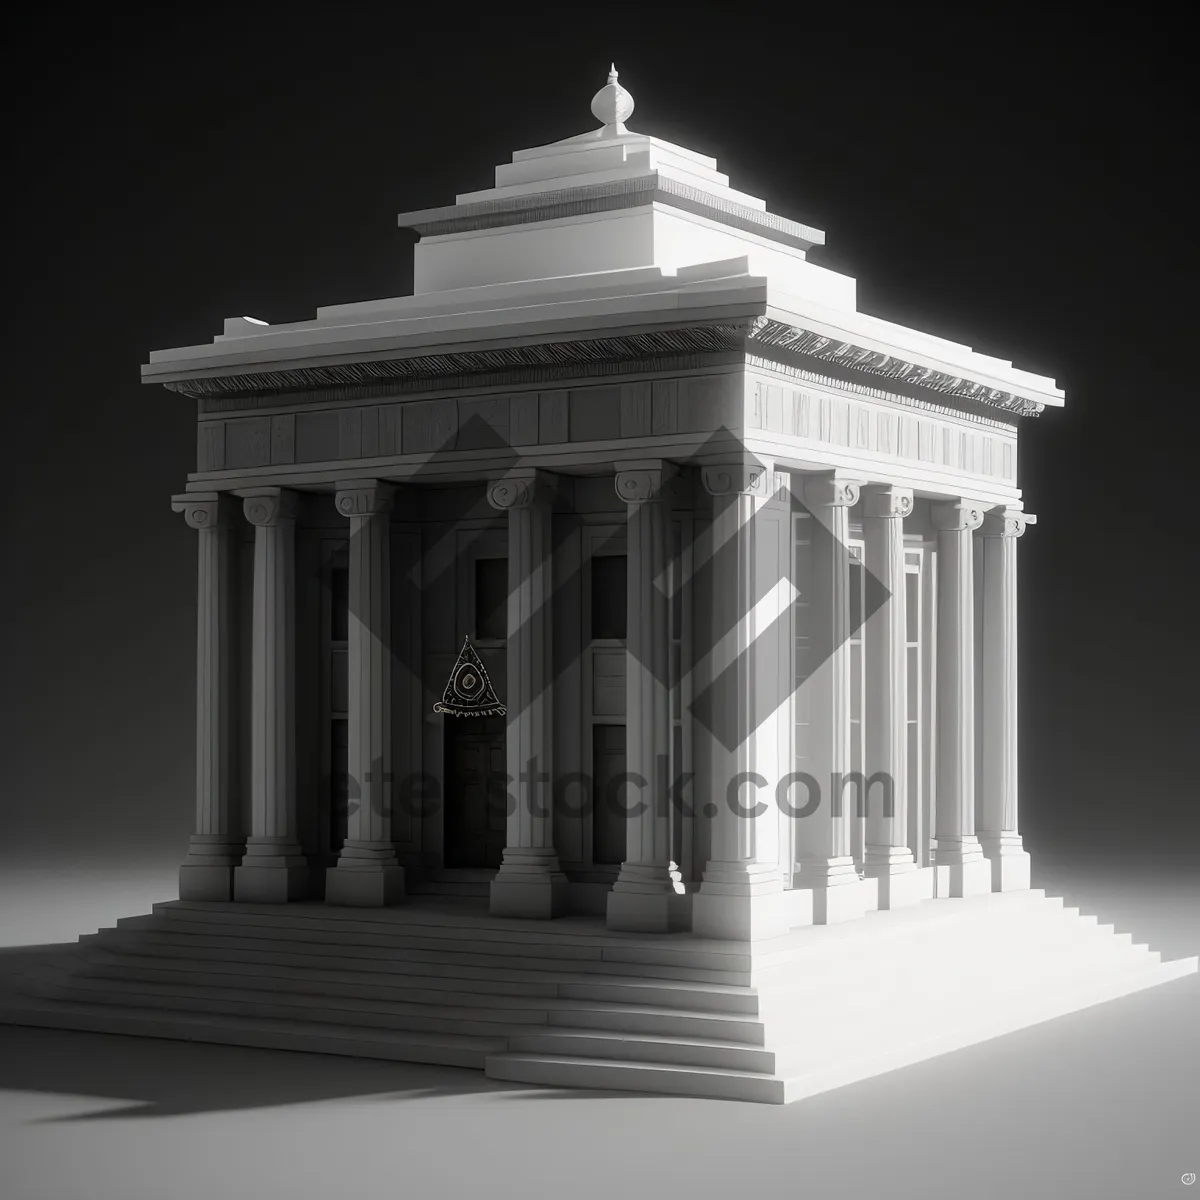 Picture of Classic Capital Columns in Historical Landmark